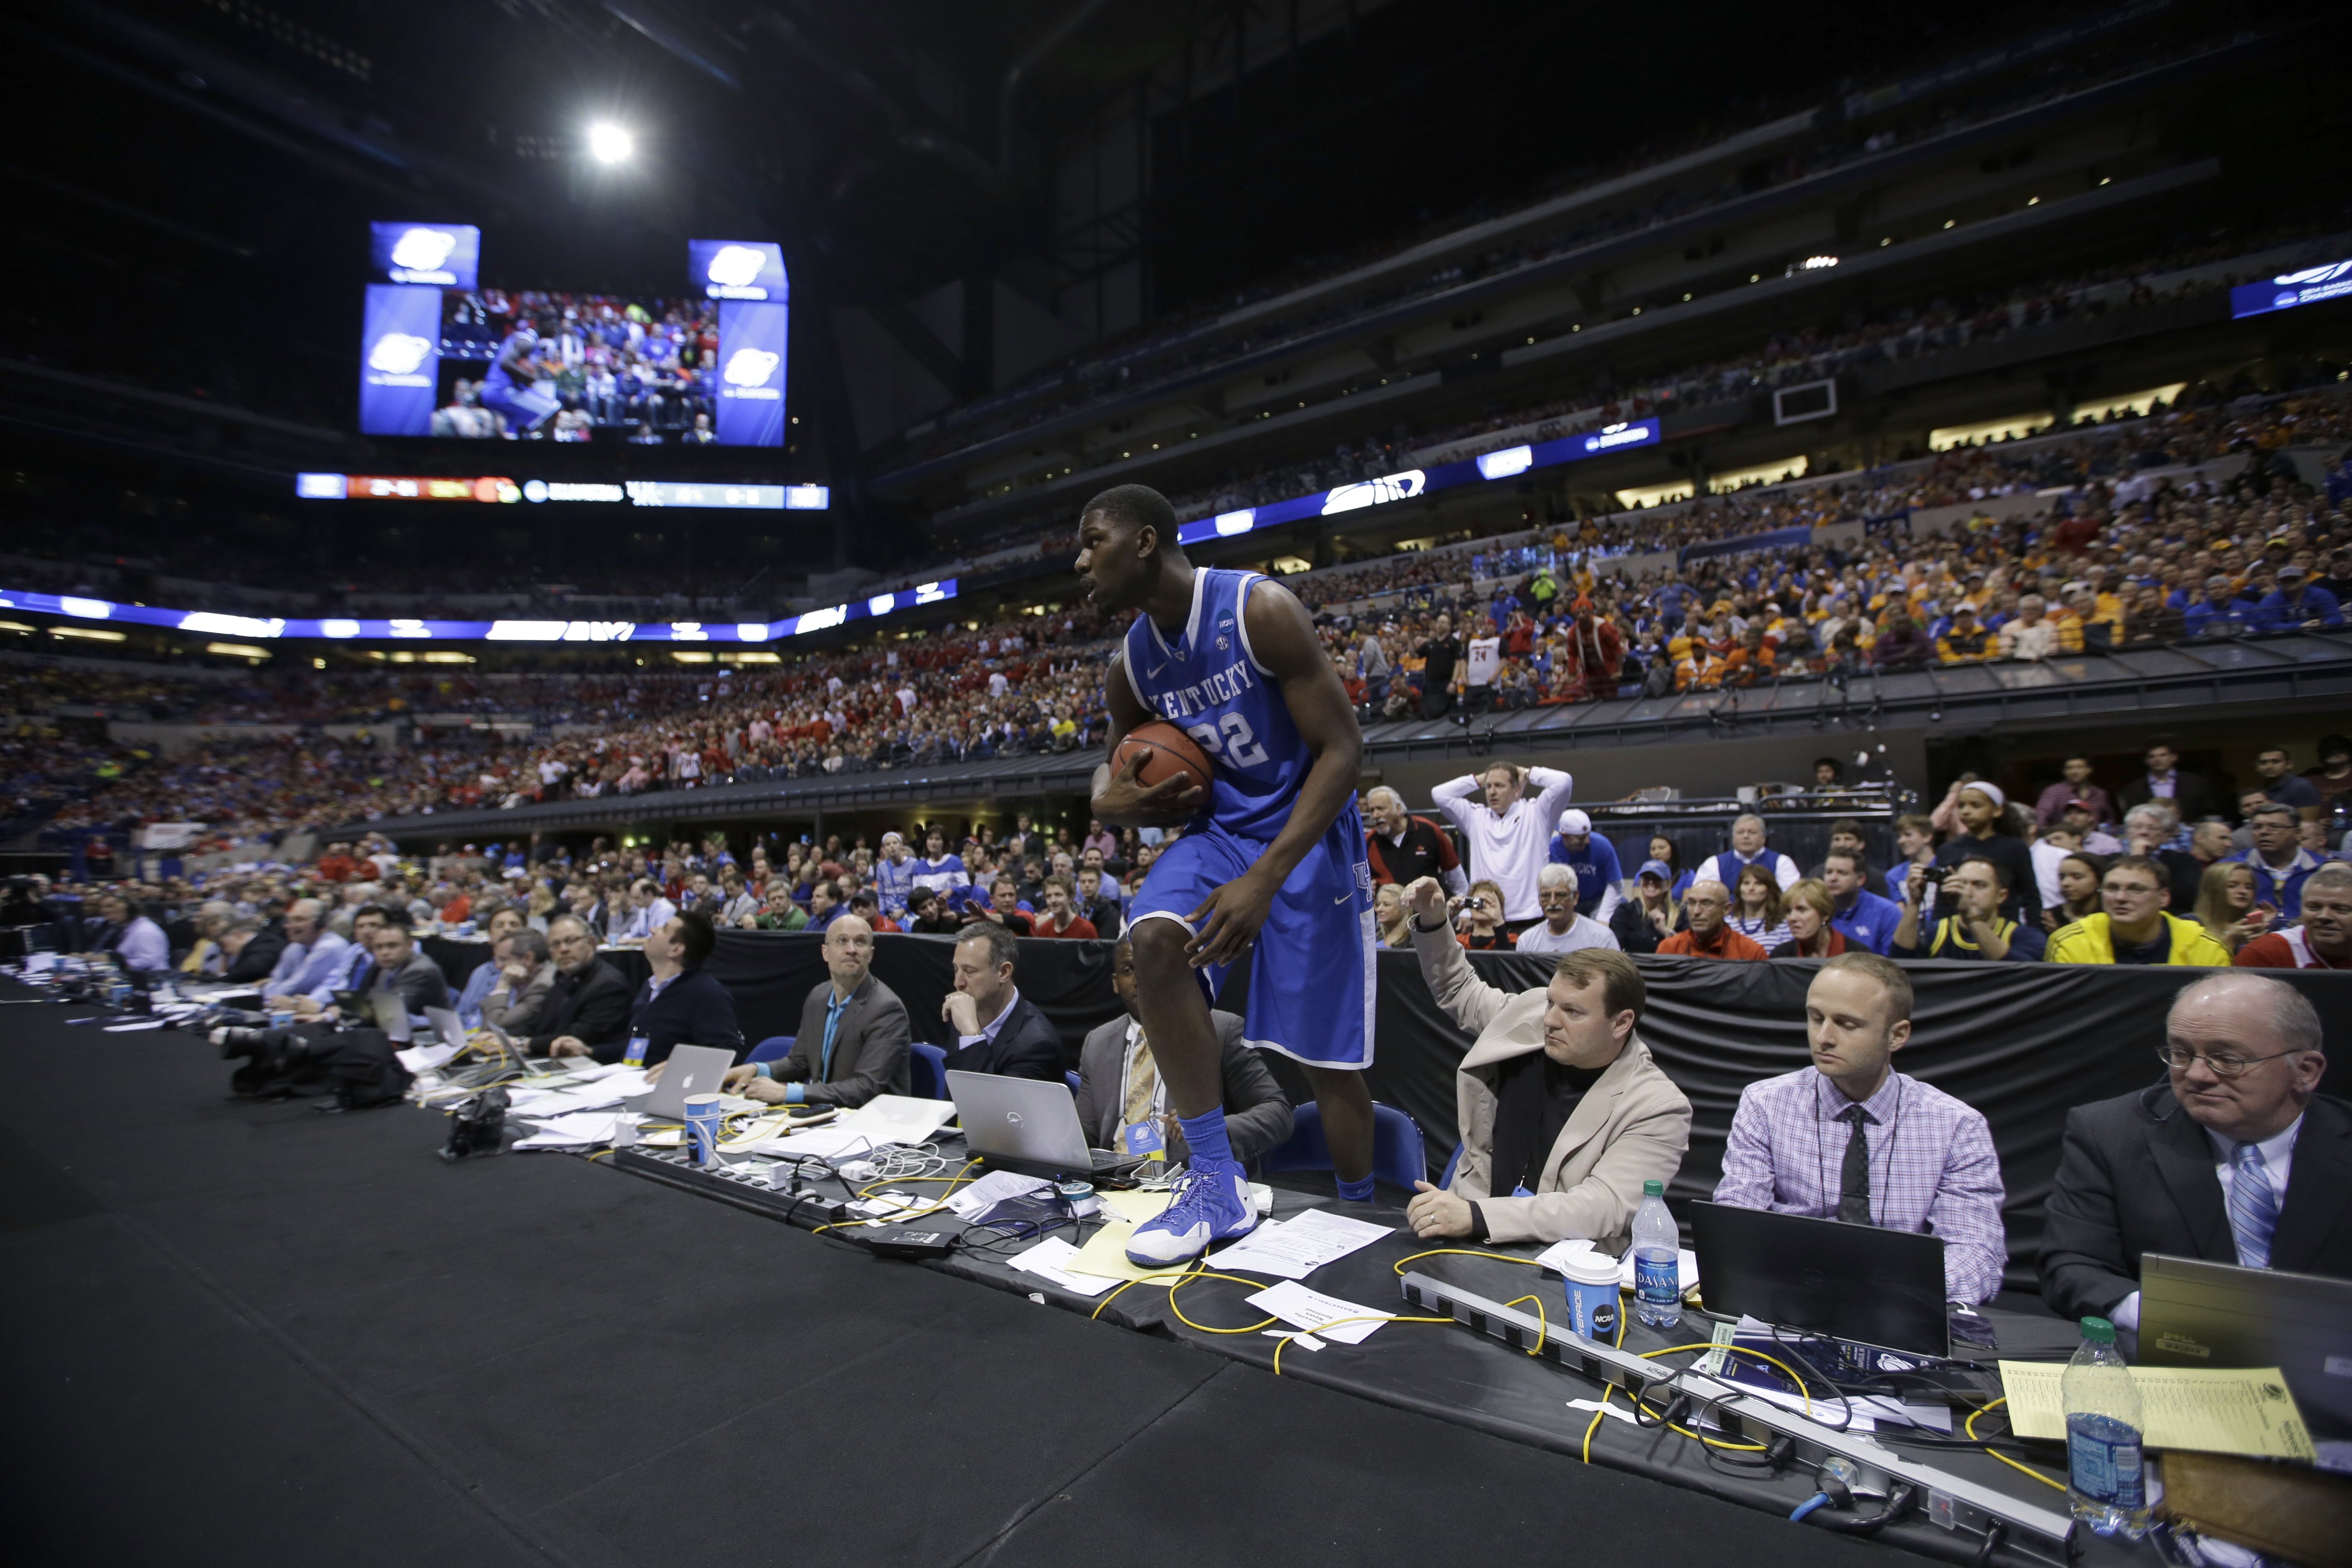 Kentucky forward Alex Poythress climbs back up to the court during the first half of an NCAA Midwest Regional semifinal college basketball tournament game against the Louisville, March 28, 2014, in Indianapolis.